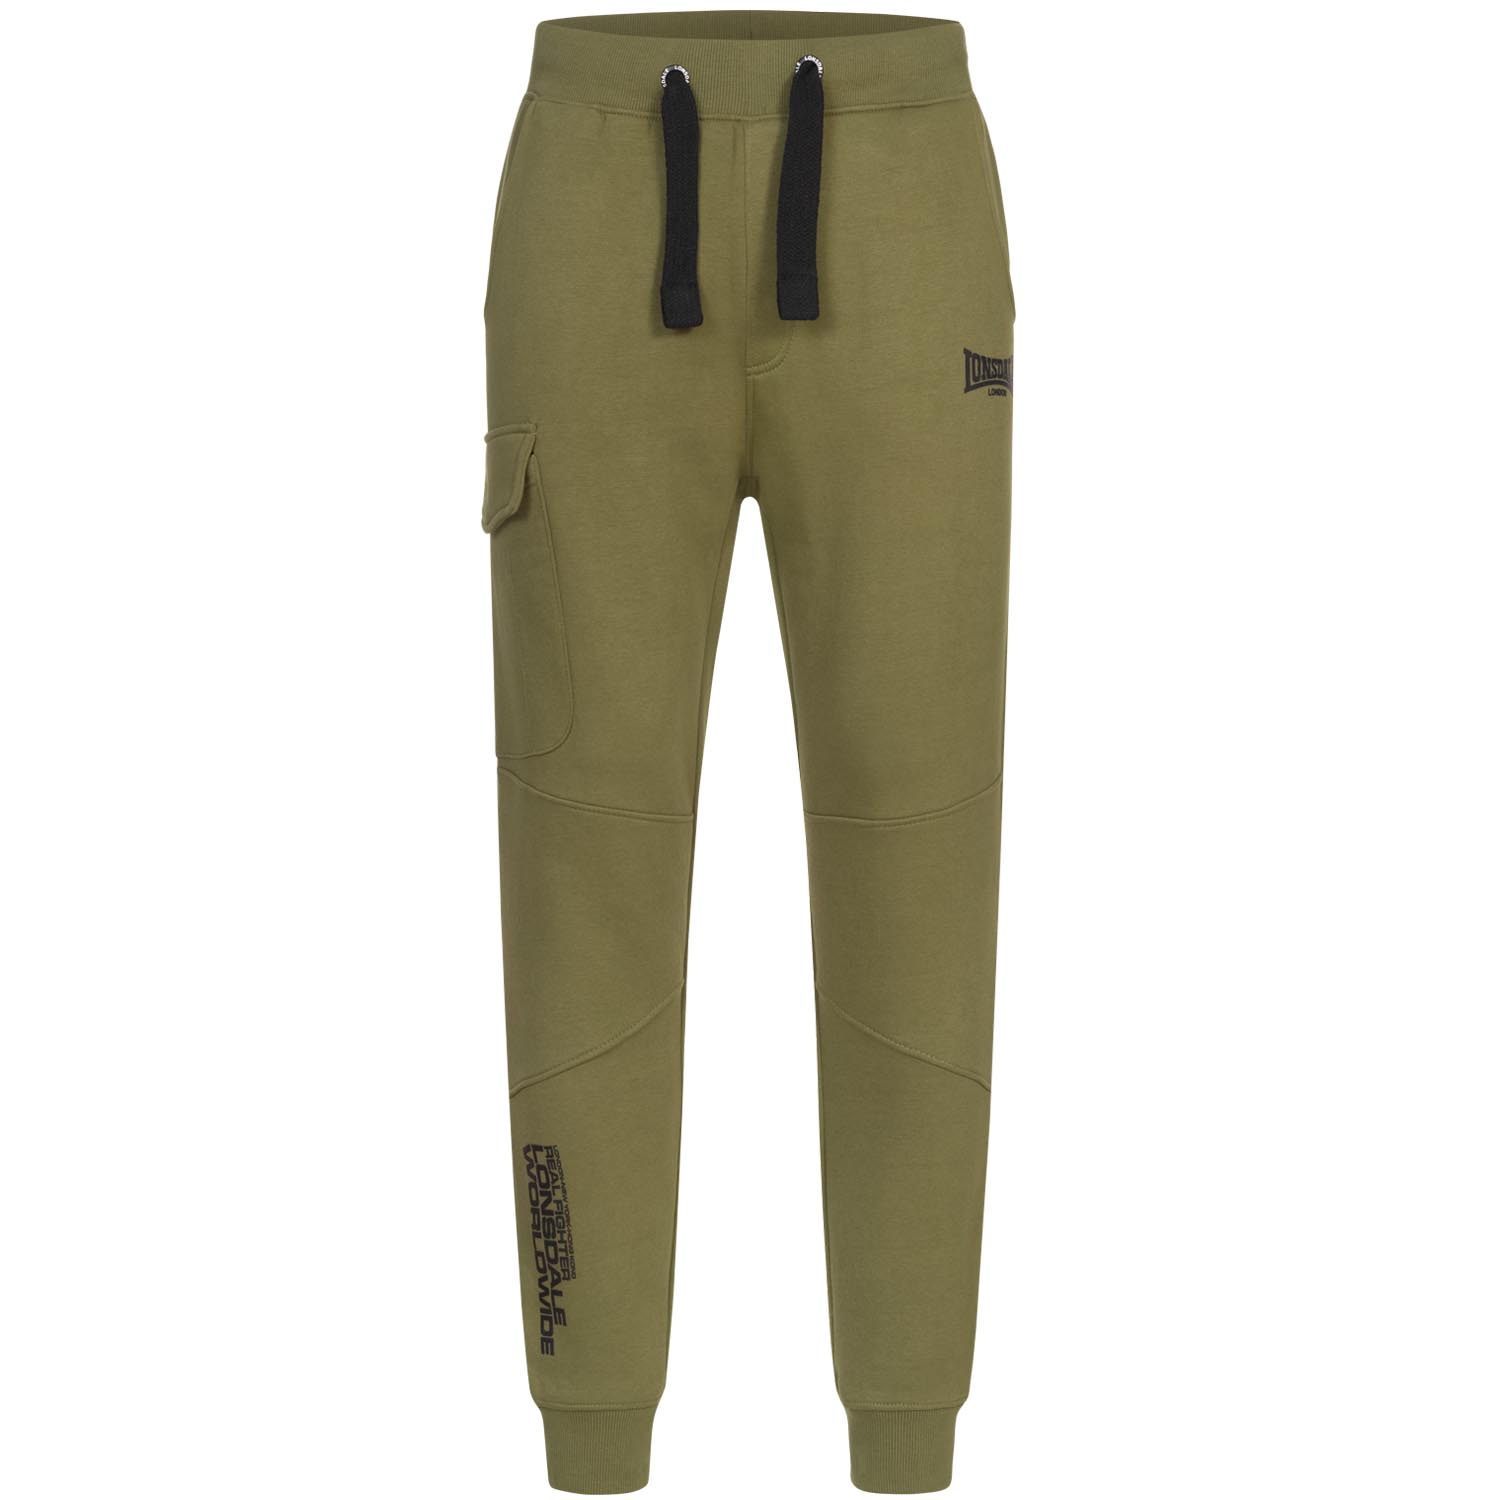 Lonsdale Joggers, Tweedmouth, olive, S